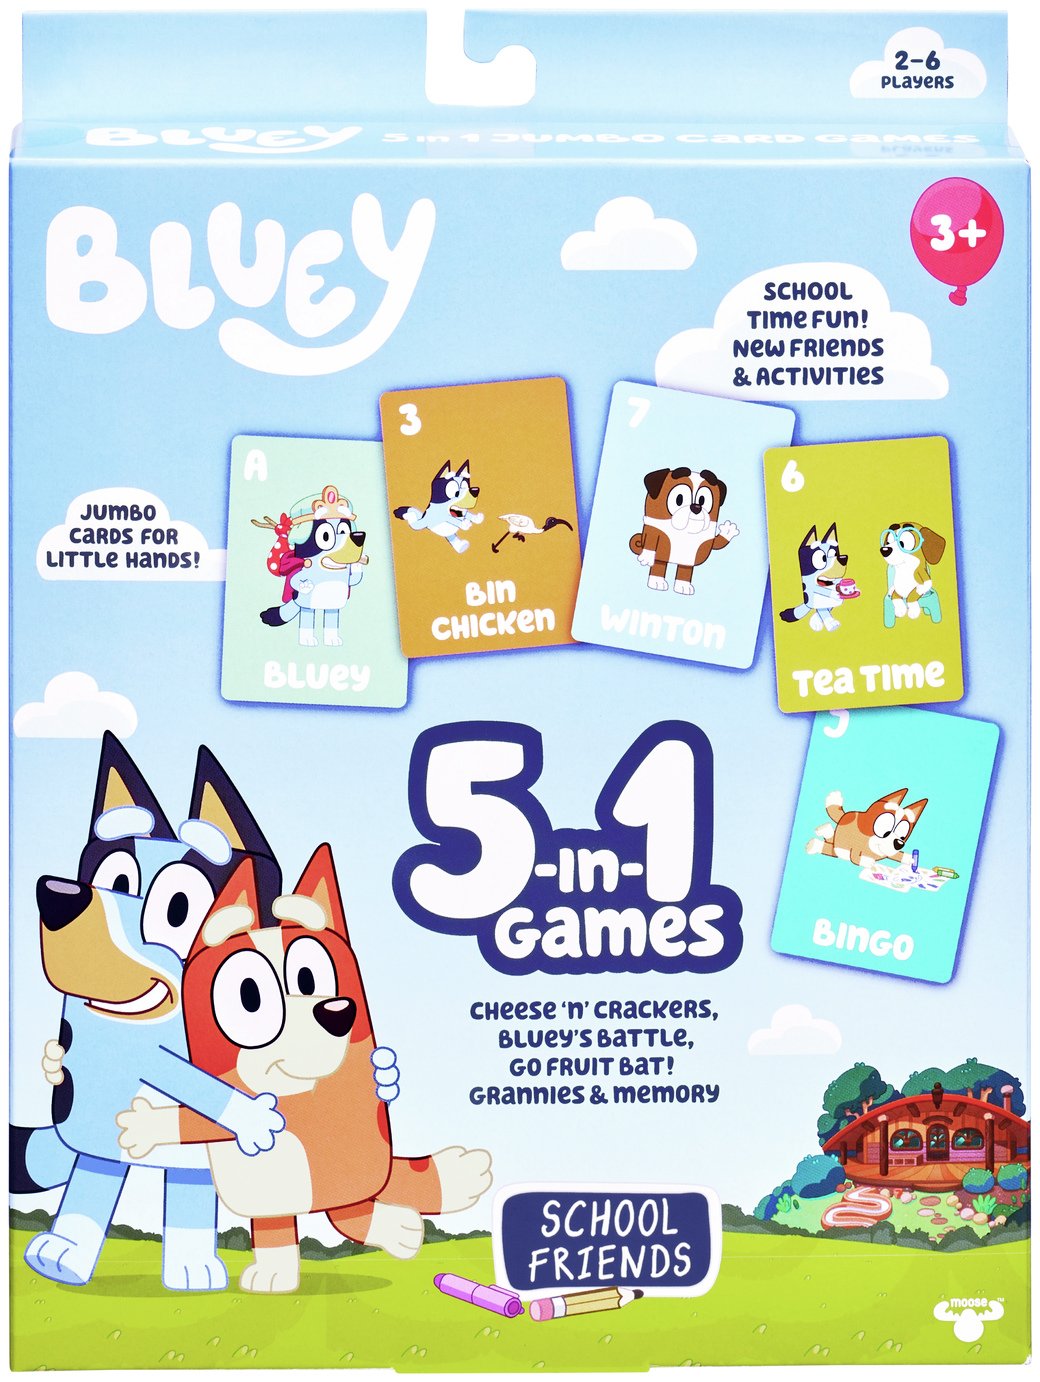 Bluey School Friends 5 in 1 Games review